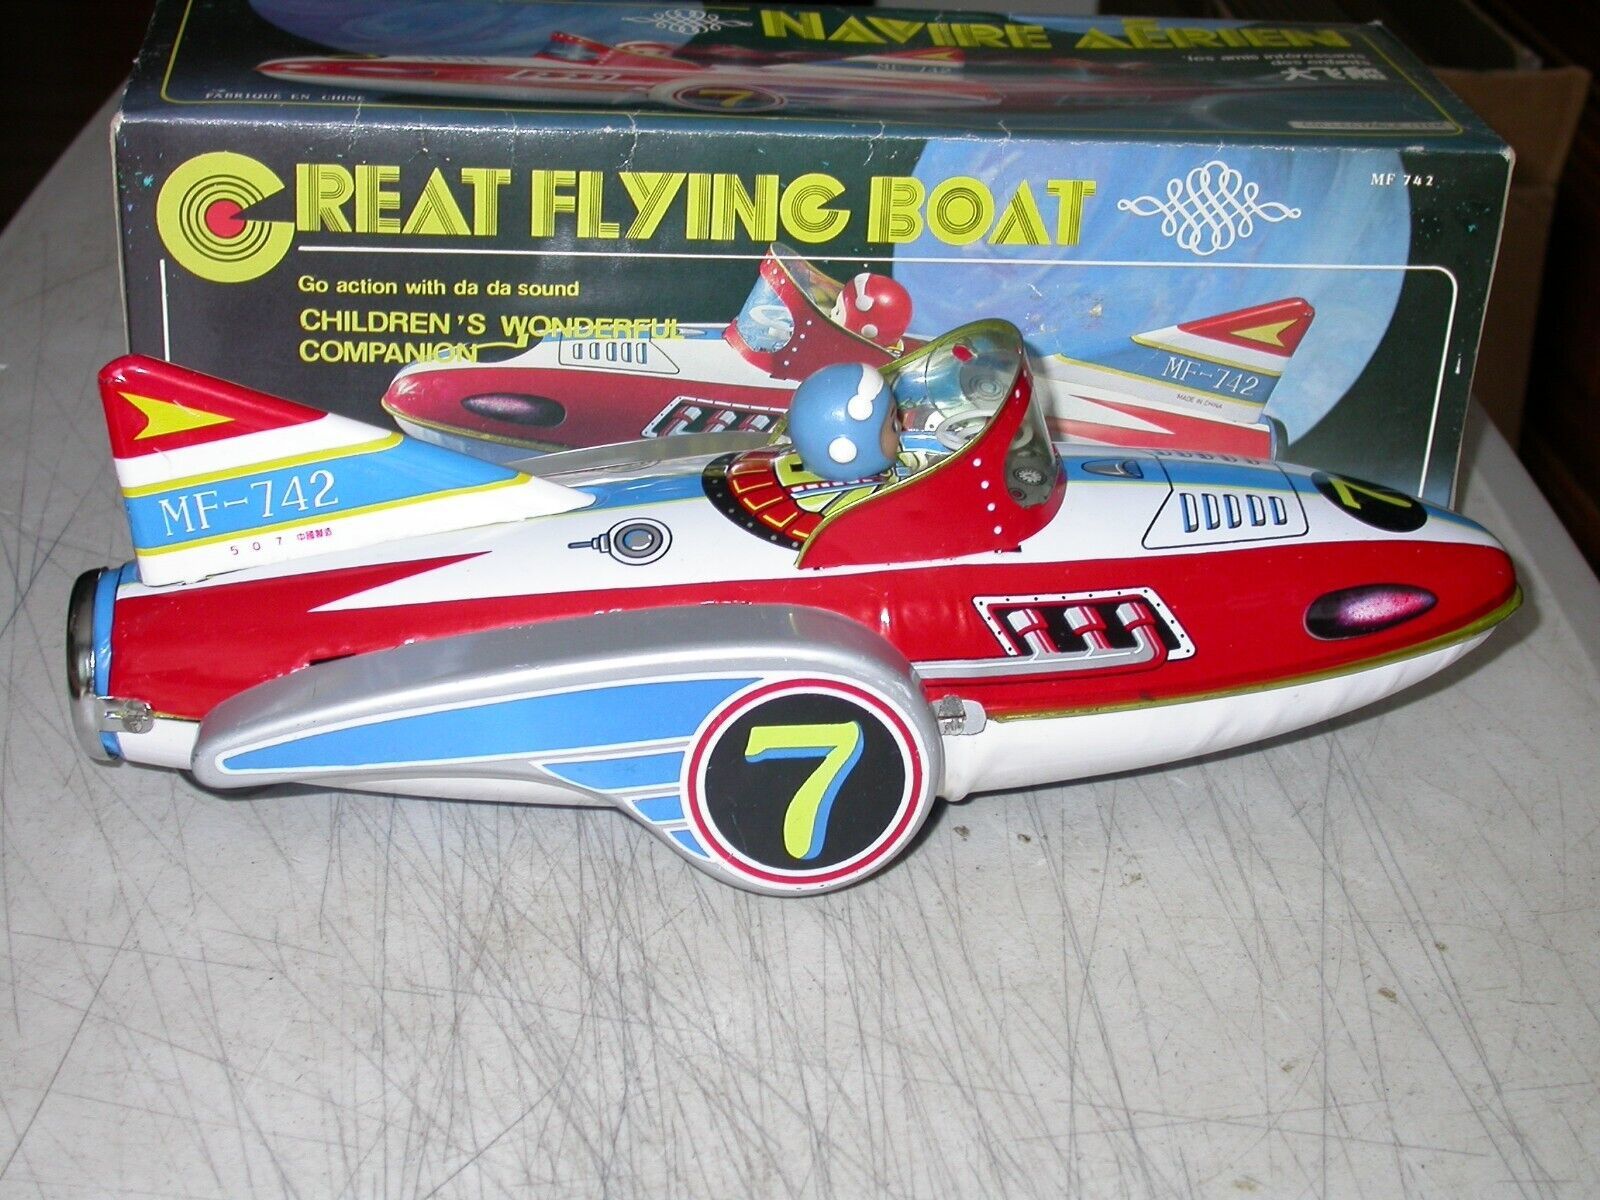 MF 742 Navire Aerien Great Flying Boat Friction Tin Toy Original Box Noise Nice - $24.99